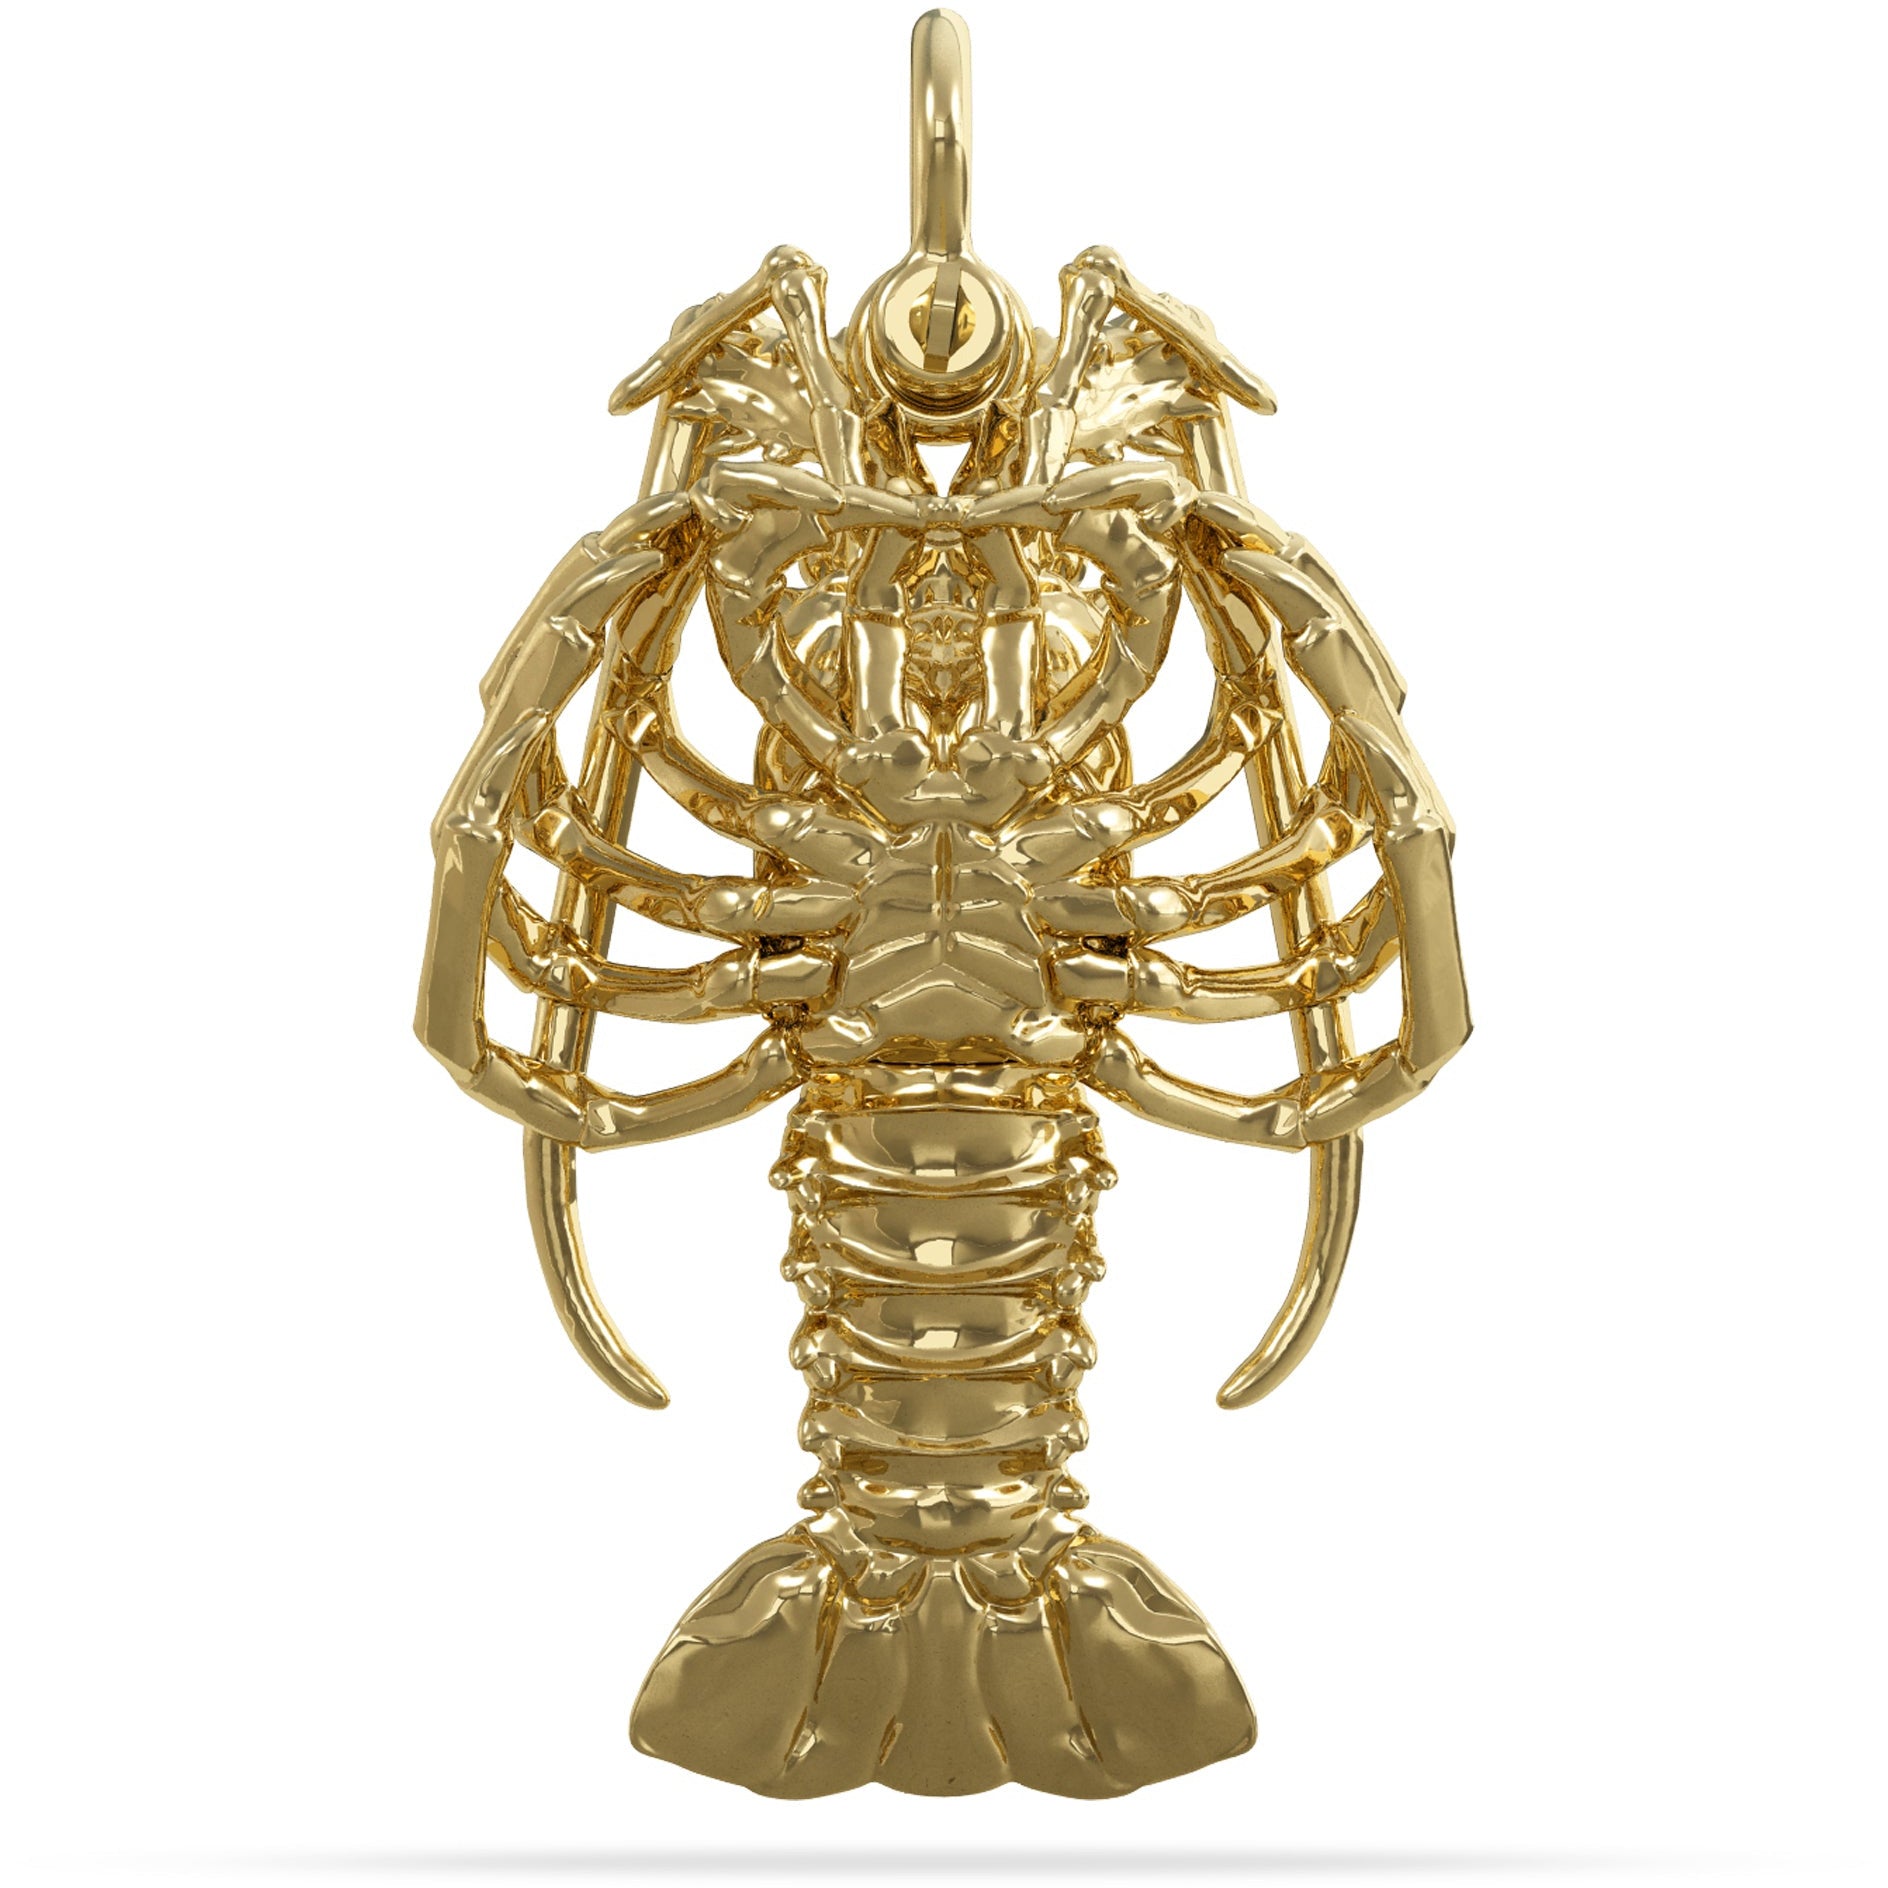 Under Side of Solid 14k Spiny Florida Lobster Pendant High Polished Mirror Finish Shackle Hung on A Mariner Shackle Bail Custom Designed By Nautical Treasure Jewelry In The Florida Keys Islamorada for 2022 Mini Season